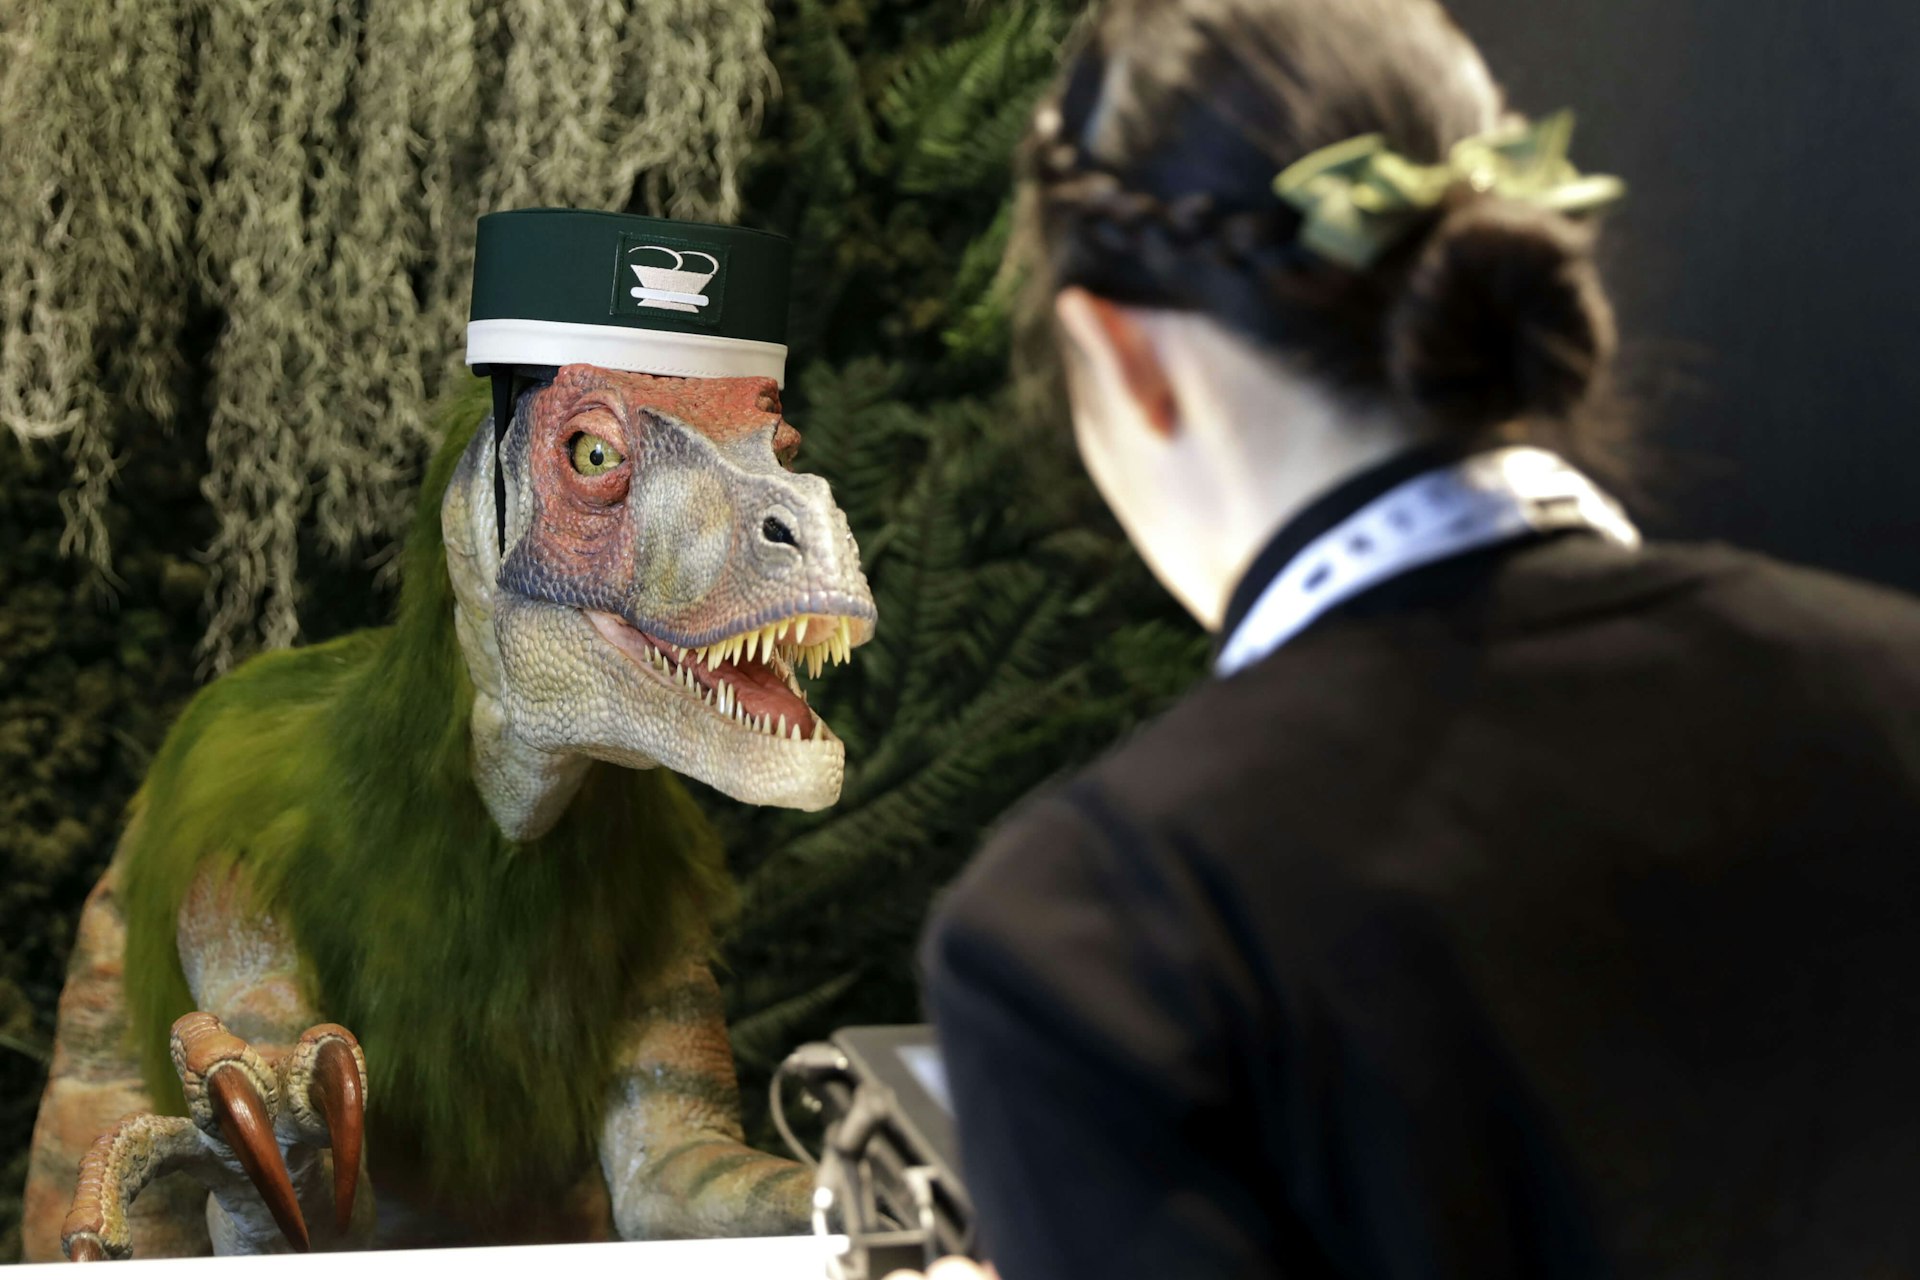 A Kokoro Company Ltd. robotic dinosaur stands at a hotel reception desk as an attendant demonstrates how it works